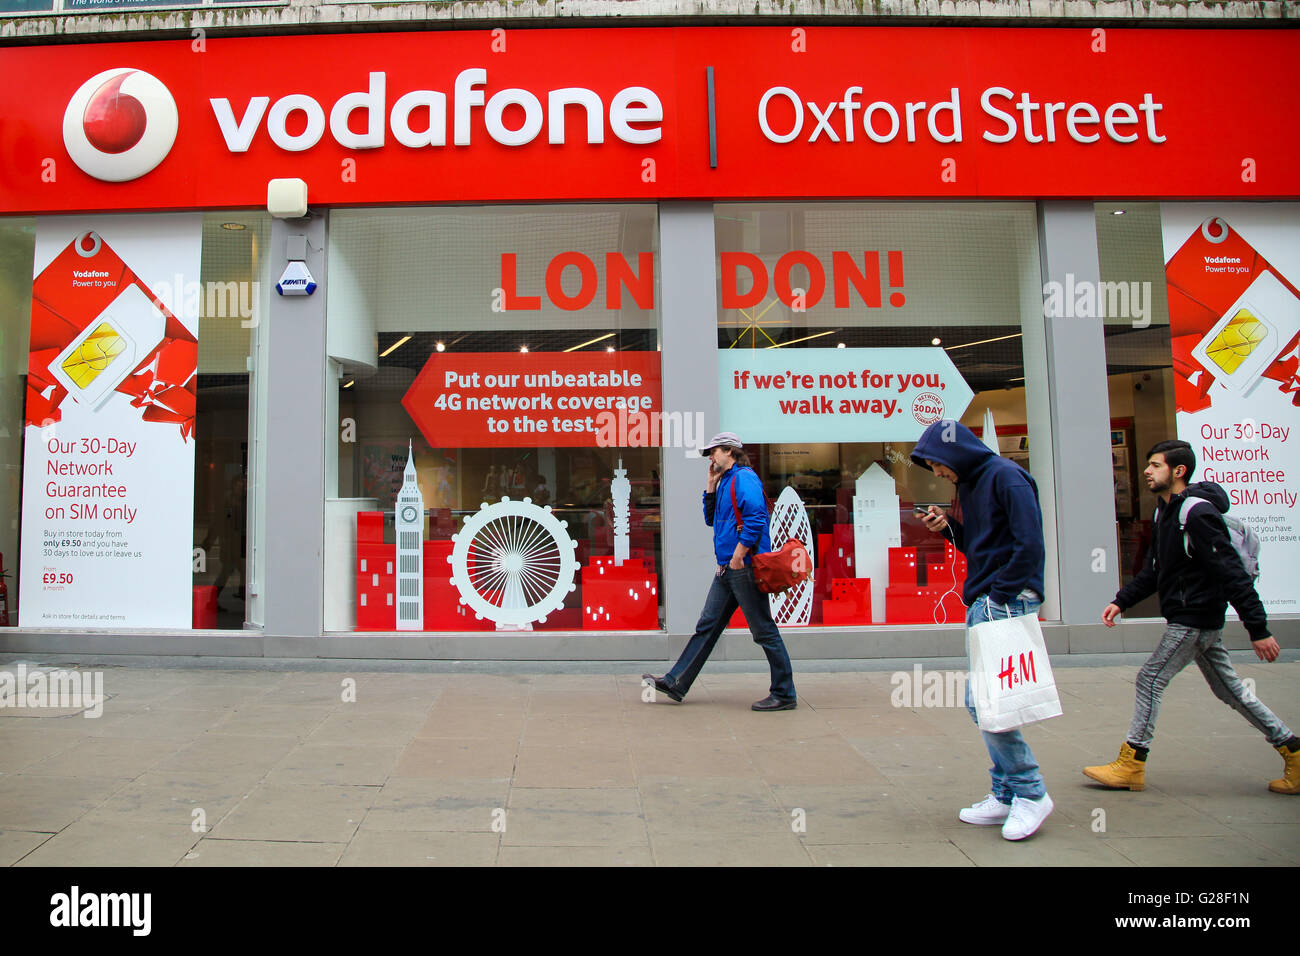 People pass by the Vodafone mobile phone store in Oxford Street in London Stock Photo